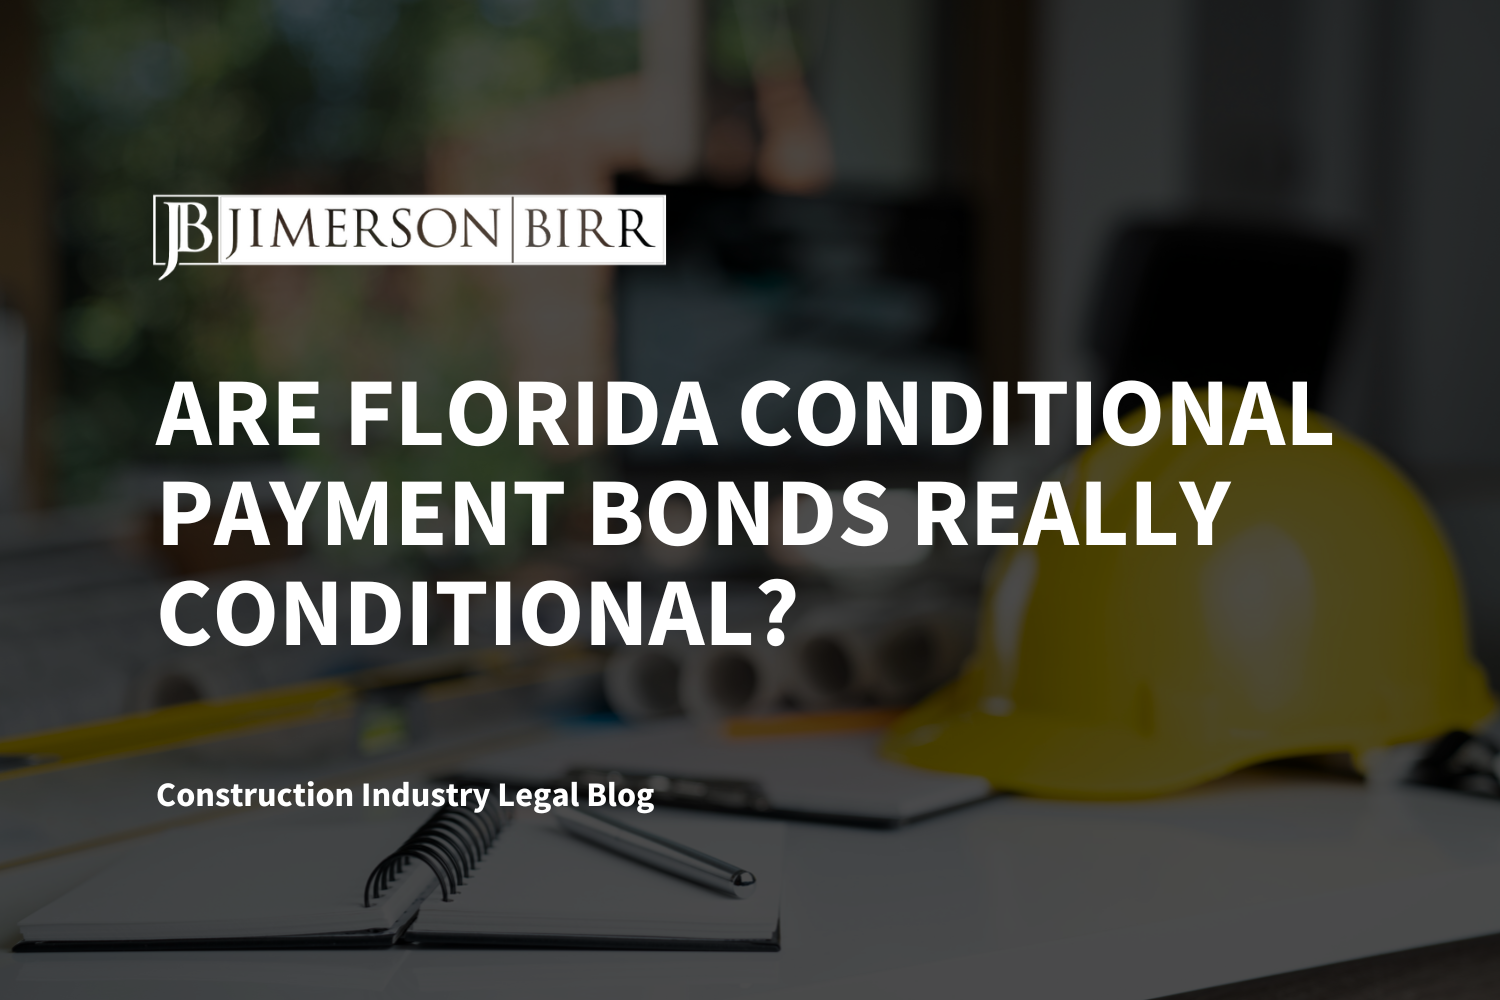 Are Florida Conditional Payment Bonds Really Conditional?